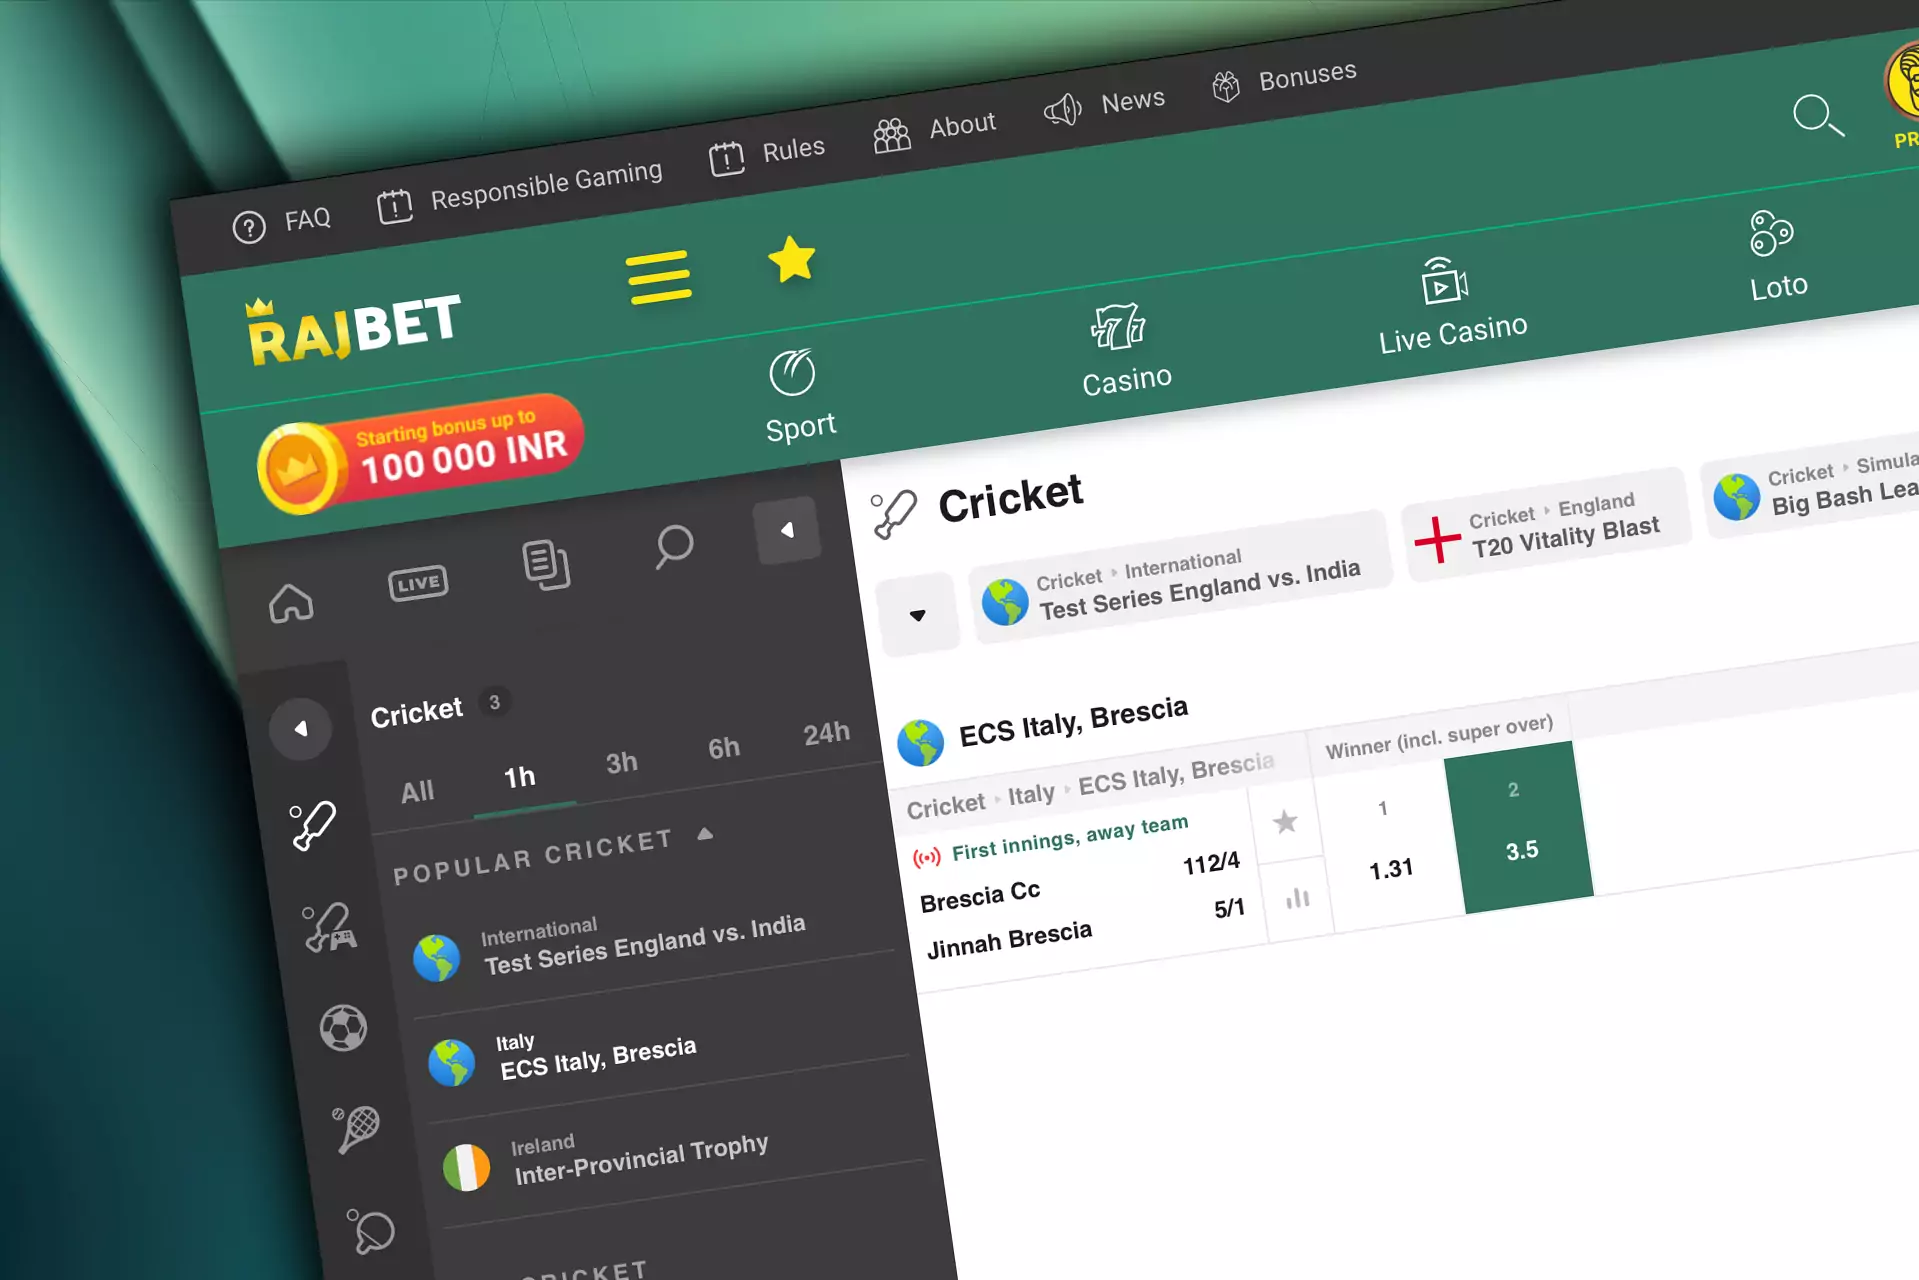 Rajbet supports live sports betting.